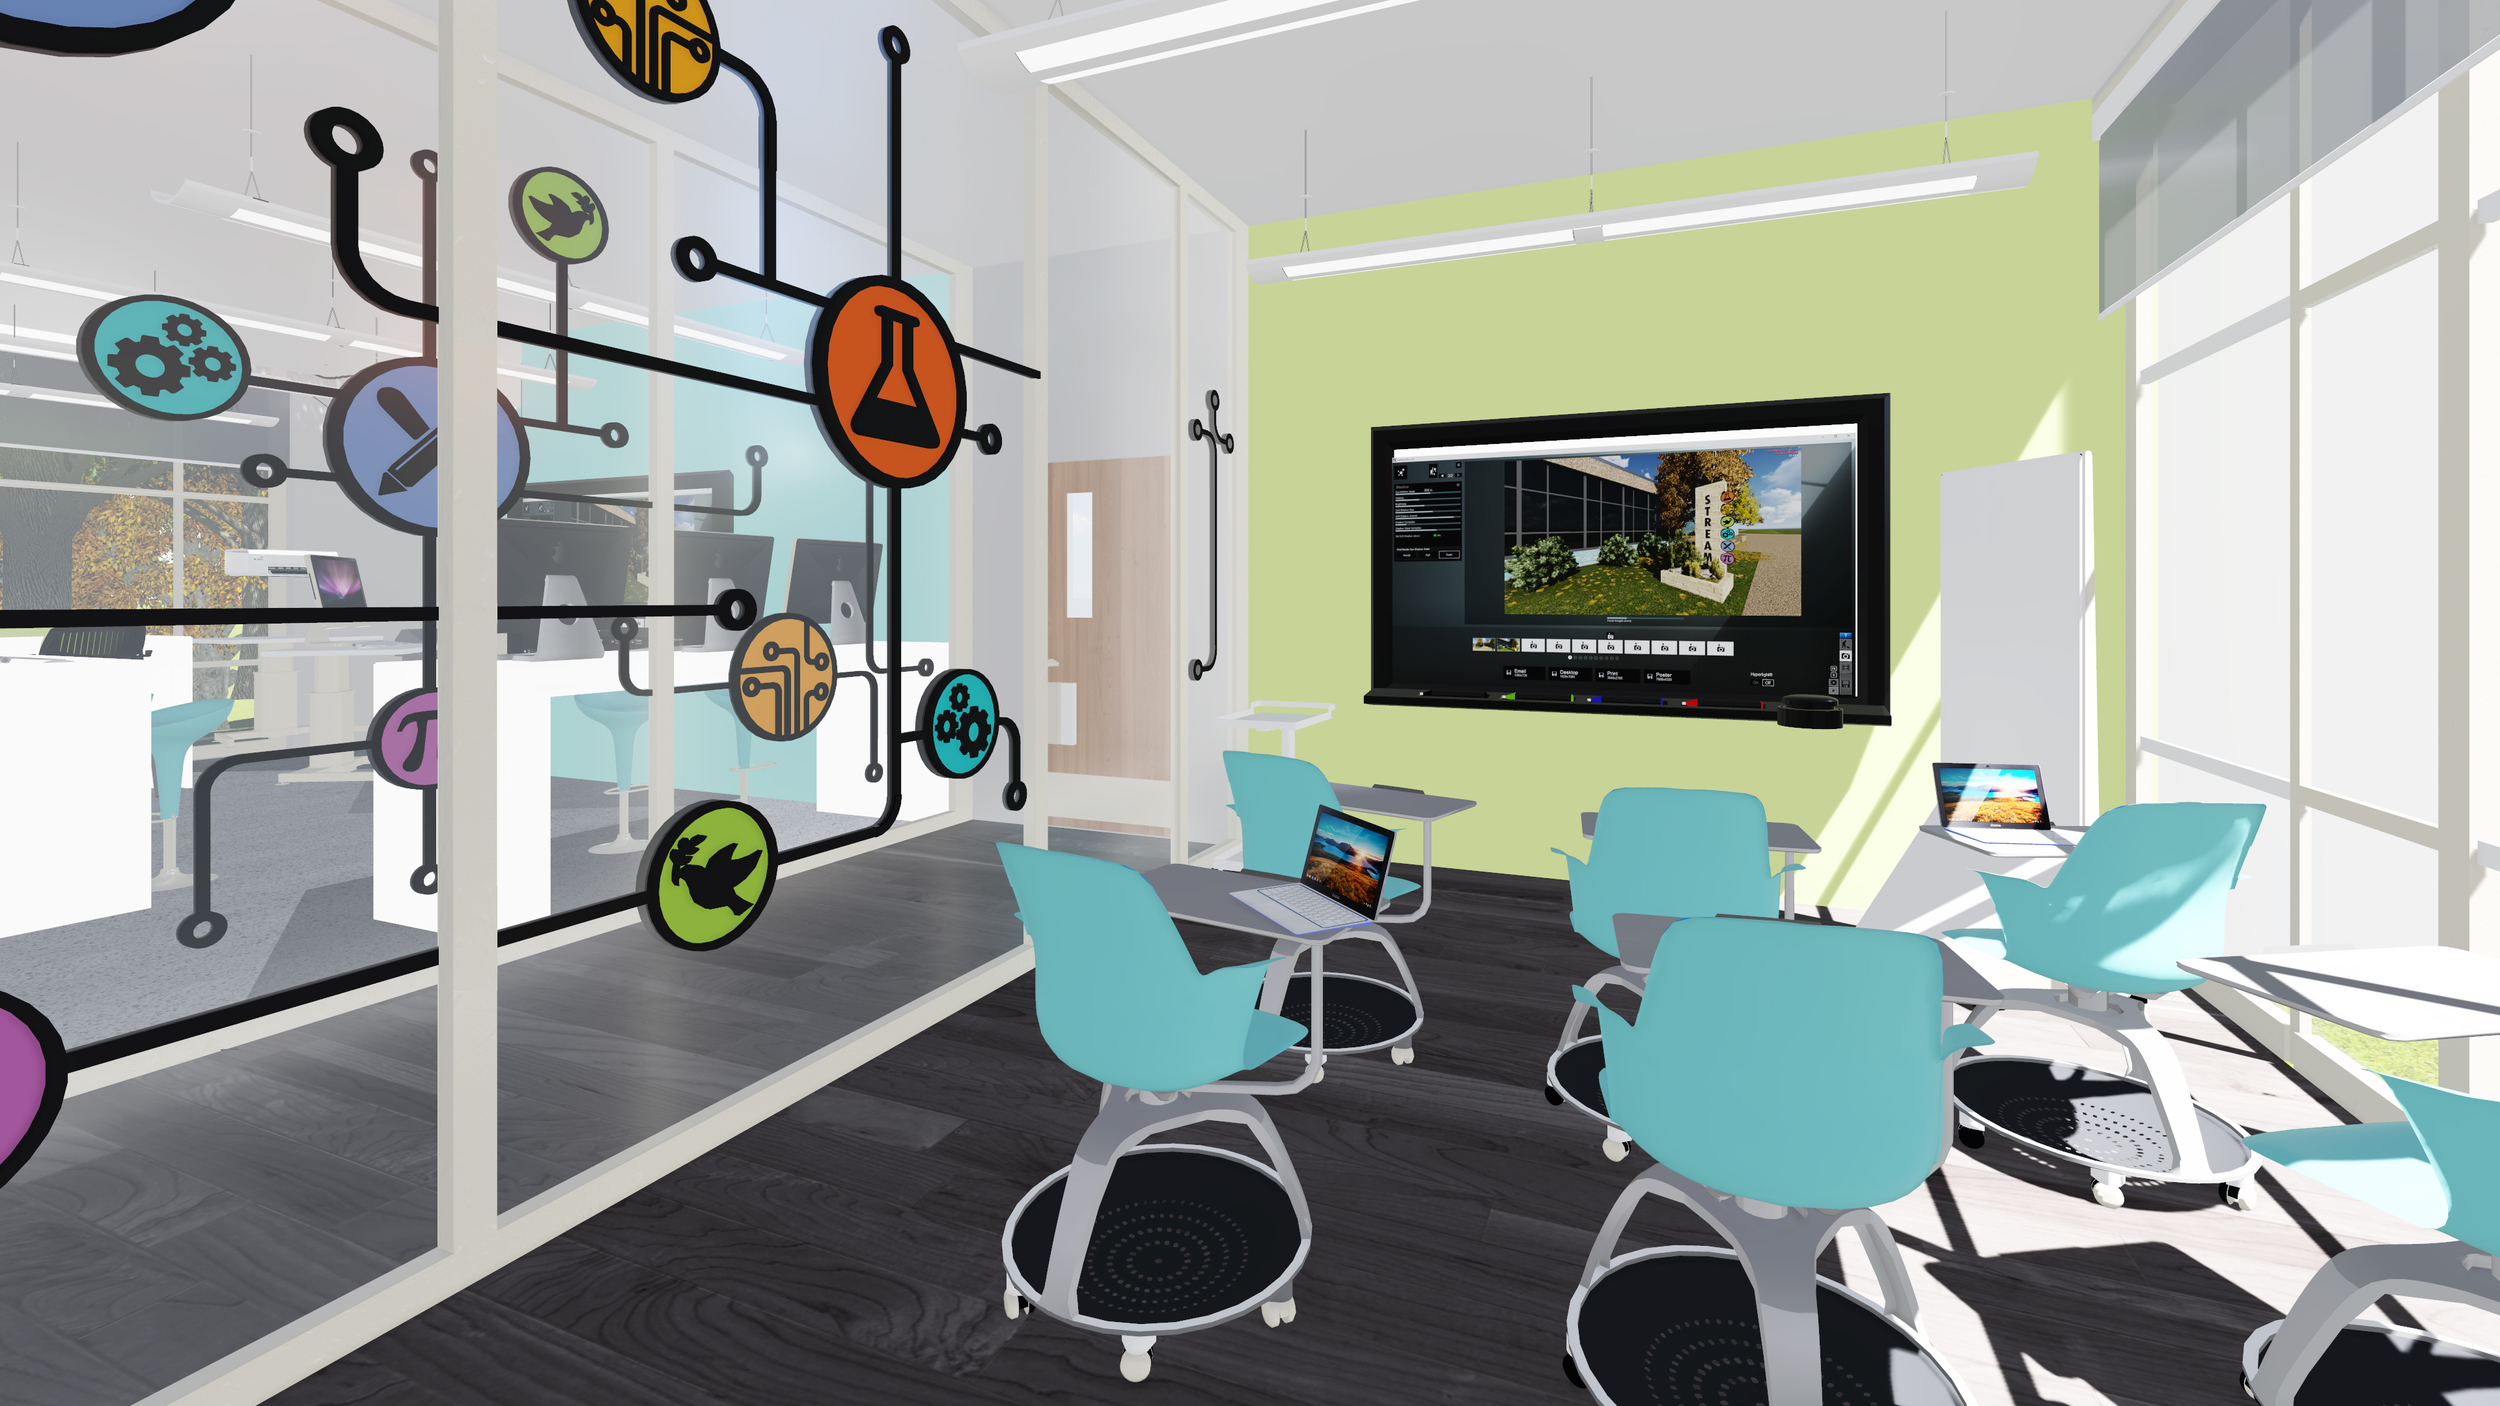 IN PROCESS: STREAM Center Flexible Learning Lab